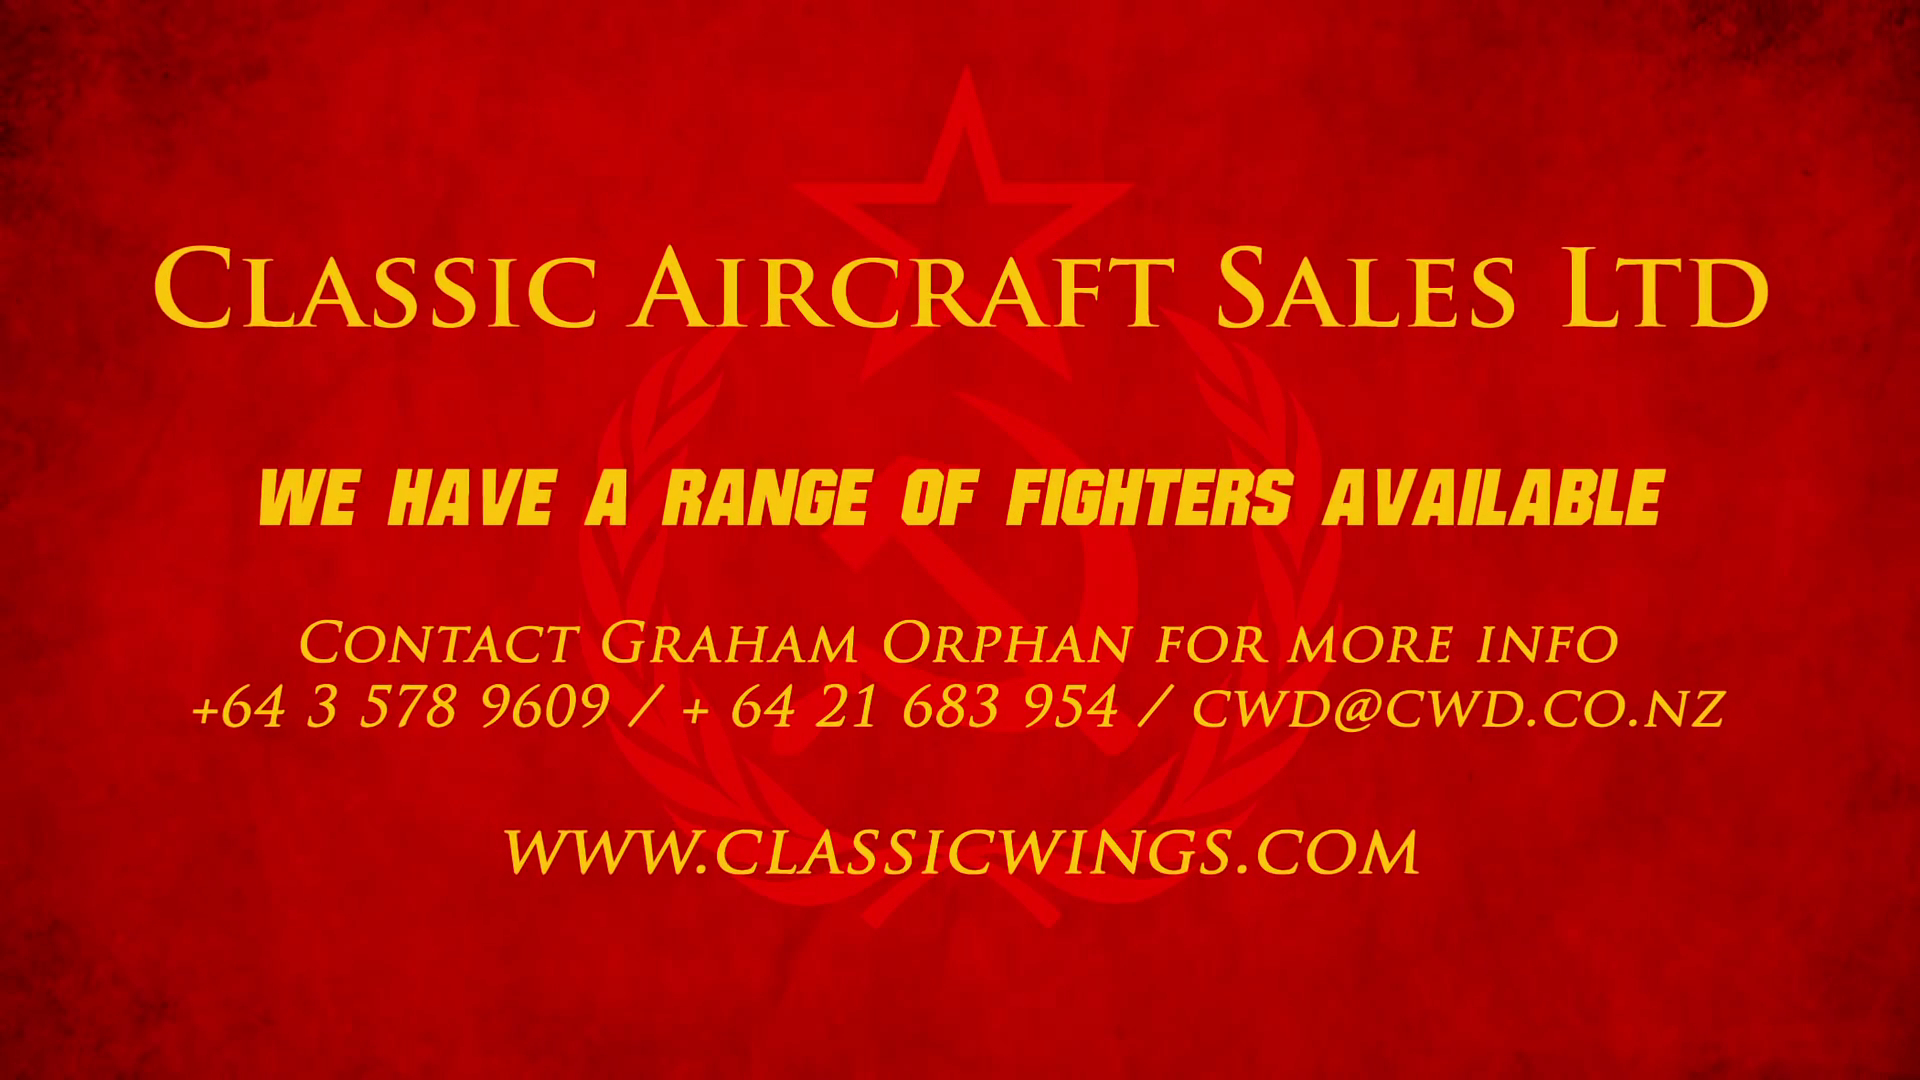 All pictures courtesy Classic Aircraft Sales Limited.